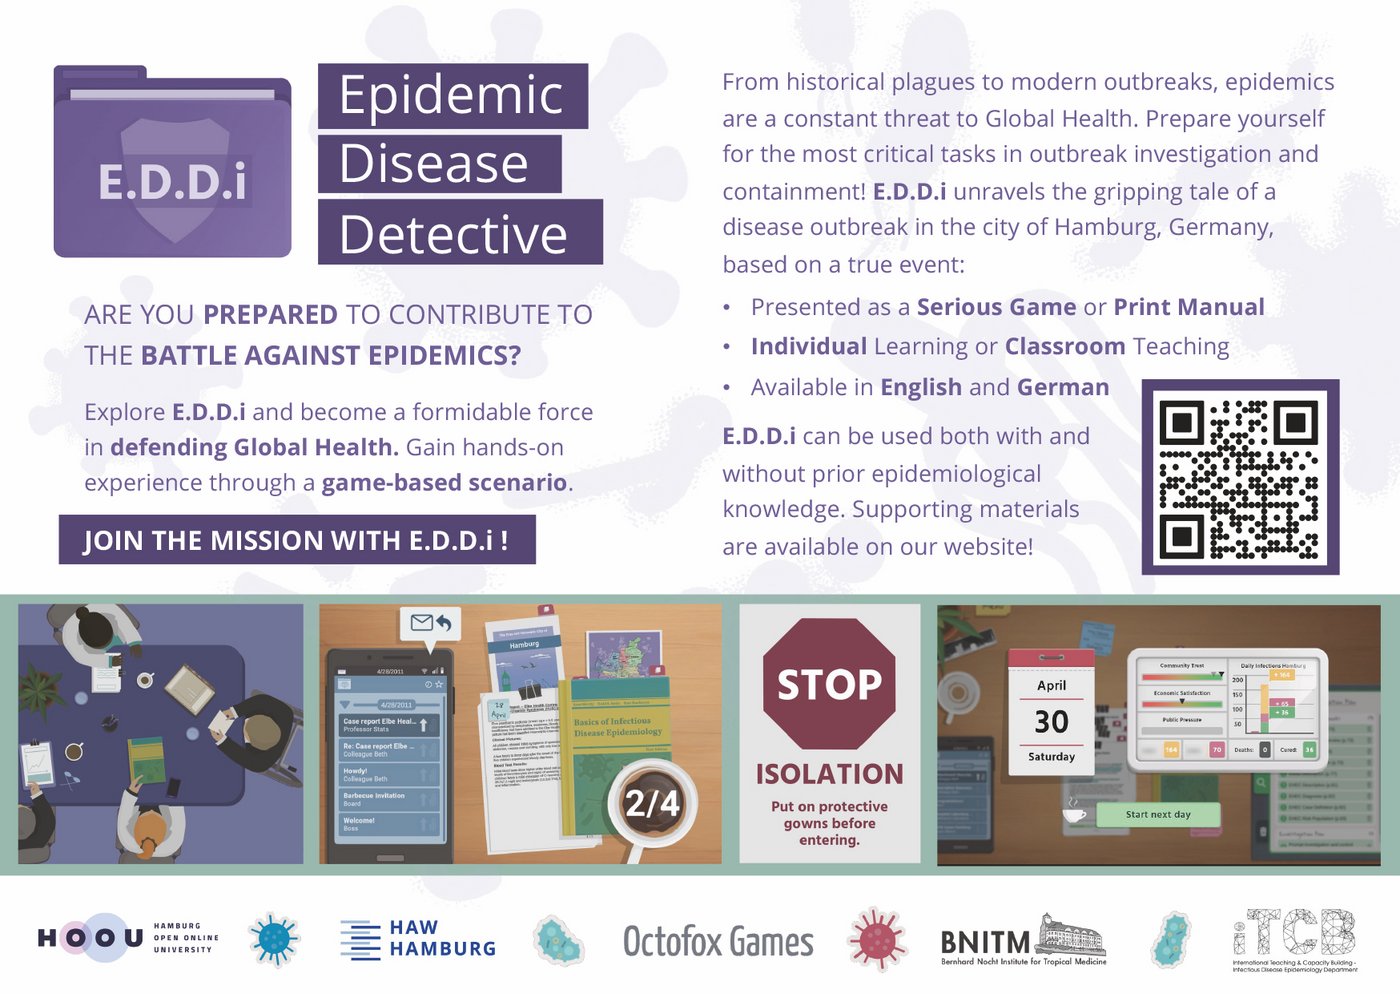 Information sheet on the game-based educational resource "Epidemic Disease Detective". It shows pictures from the learning materials (e.g. desk, group work, epidemiological statistics) and main characteristics of the educational resource.